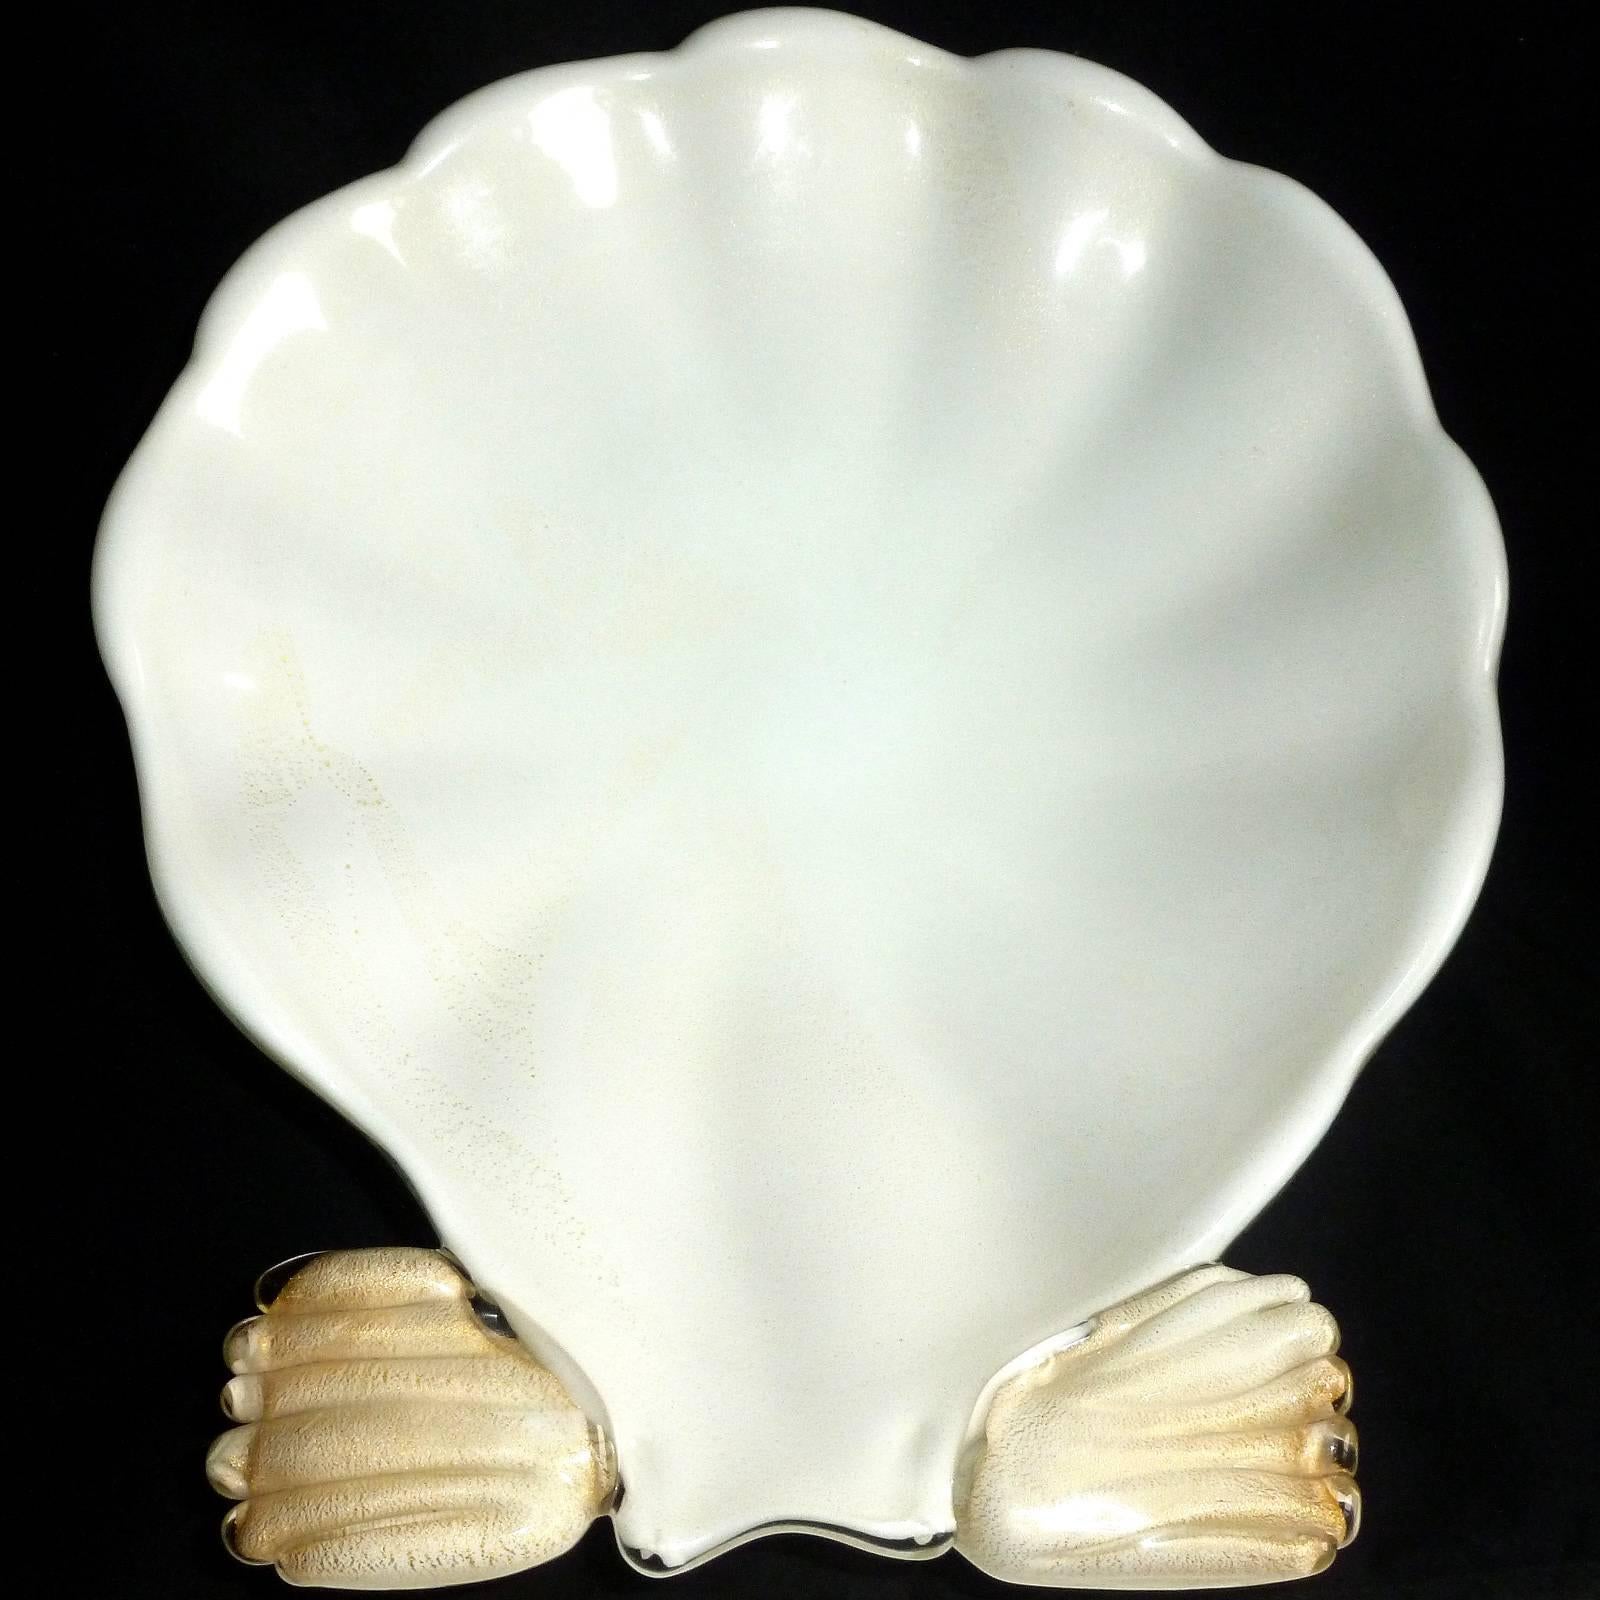 Gorgeous set of vintage Murano hand blown white and gold flecks Italian art glass conch shell centerpiece bowl and matching seashell candlesticks. All three pieces are profusely covered with gold leaf, inside and out, and stand on gold pedestals.